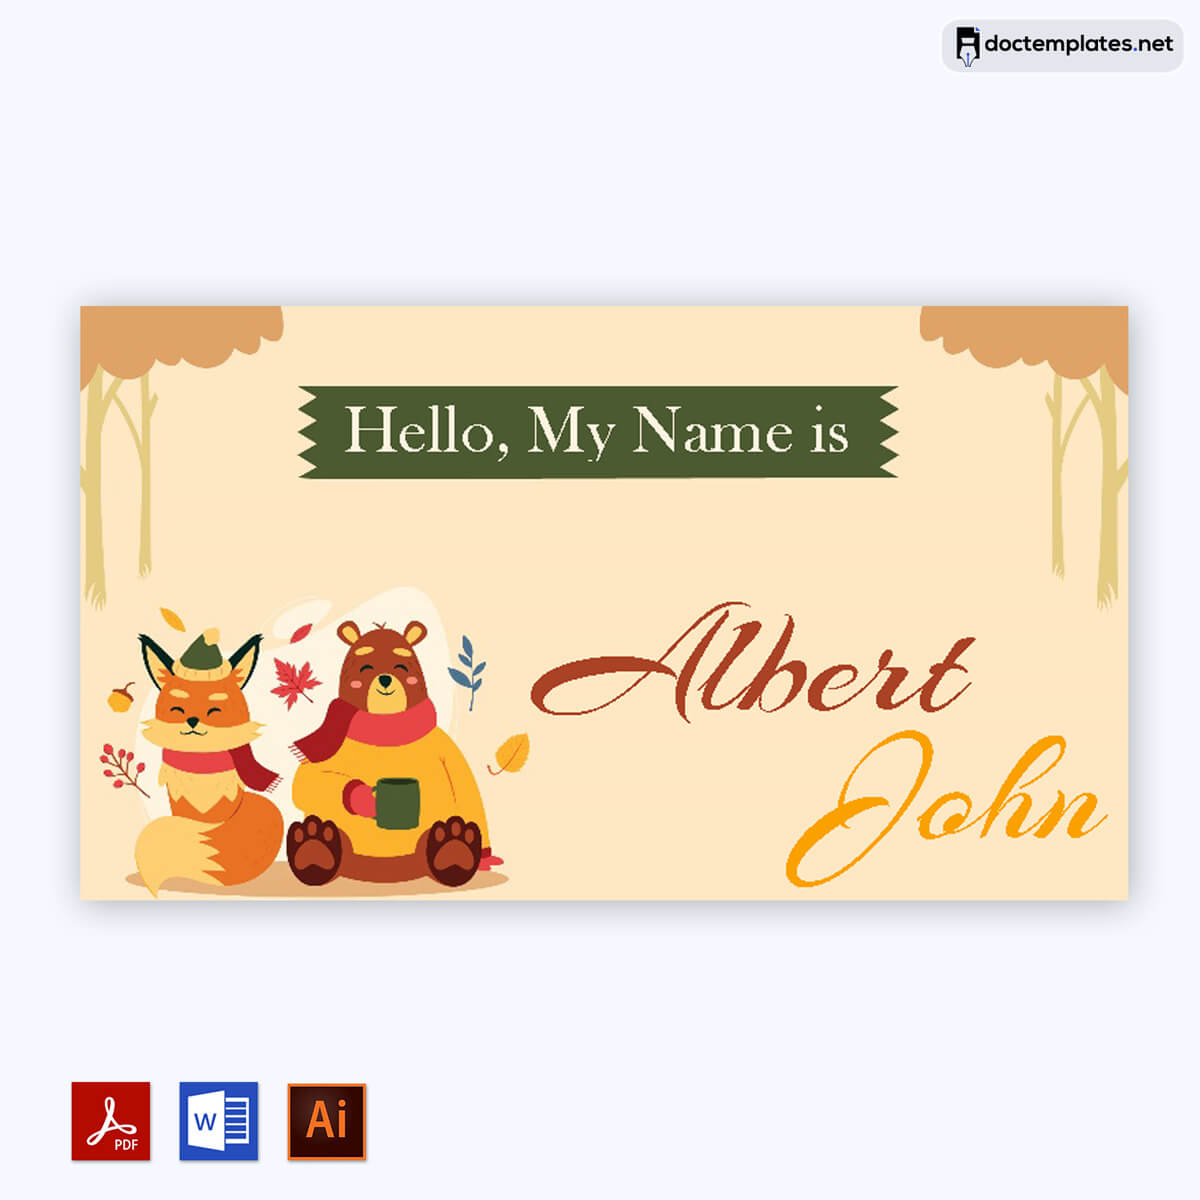 Image of Desk name tag Template Word
Desk name tag Template Word
02